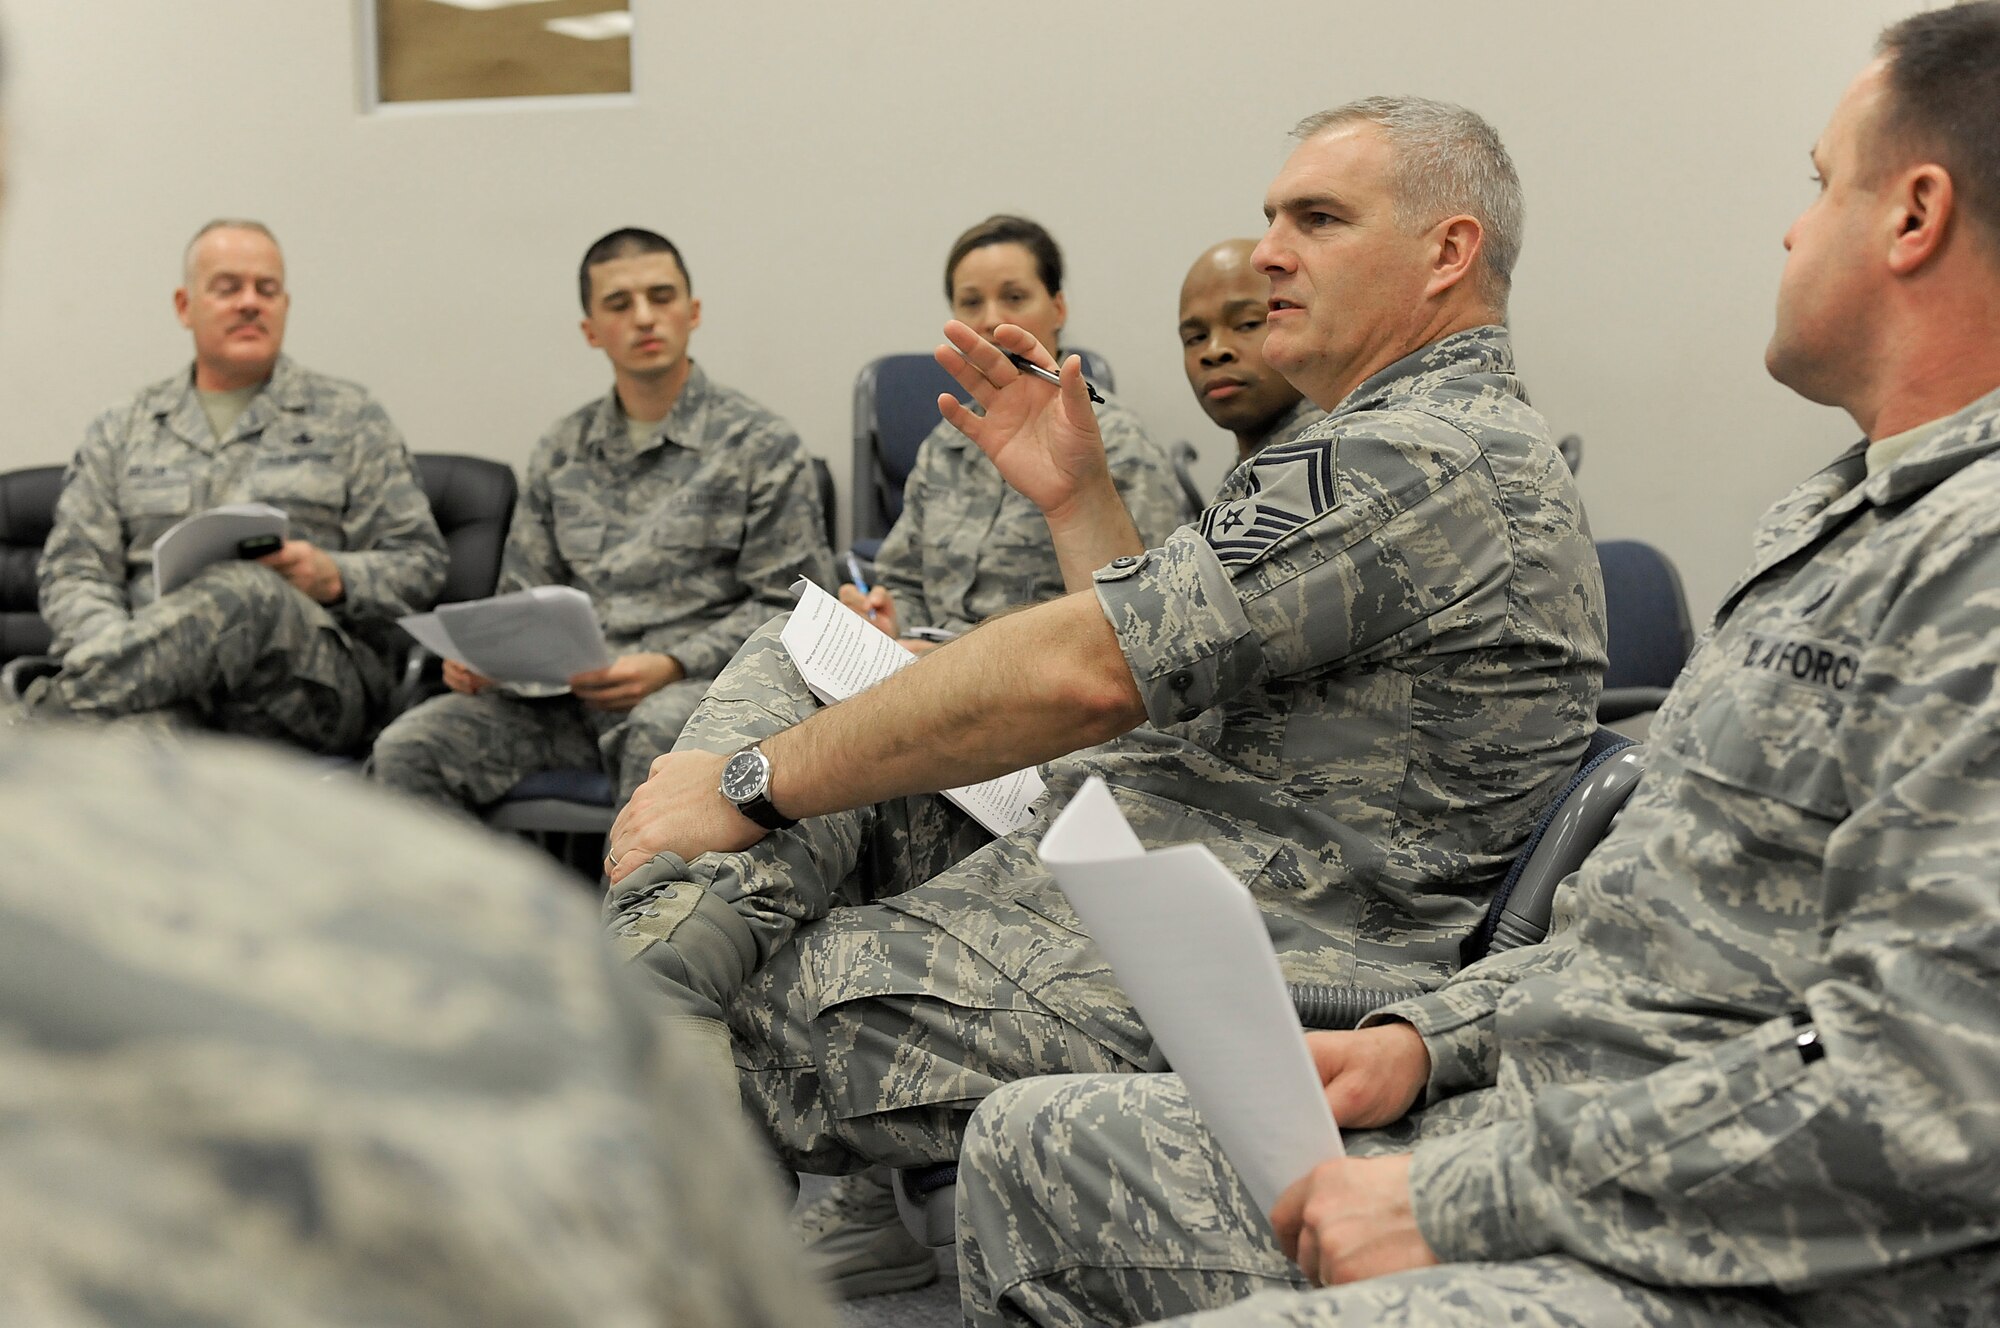 Oregon Air National Guard Senior Master Sgt. Robert Maca, center, participates in a group discussion as part of the unit’s Diversity and Inclusion Counsel meeting, Jan. 11, 2015, Portland Air National Guard Base, Ore. The Diversity and Inclusion Counsel meets during Unit Training Assembly weekends to help develop the total force crucial for mission success. (U.S. Air National Guard photo by Tech. Sgt. John Hughel, 142nd Fighter Wing Public Affairs/Released)